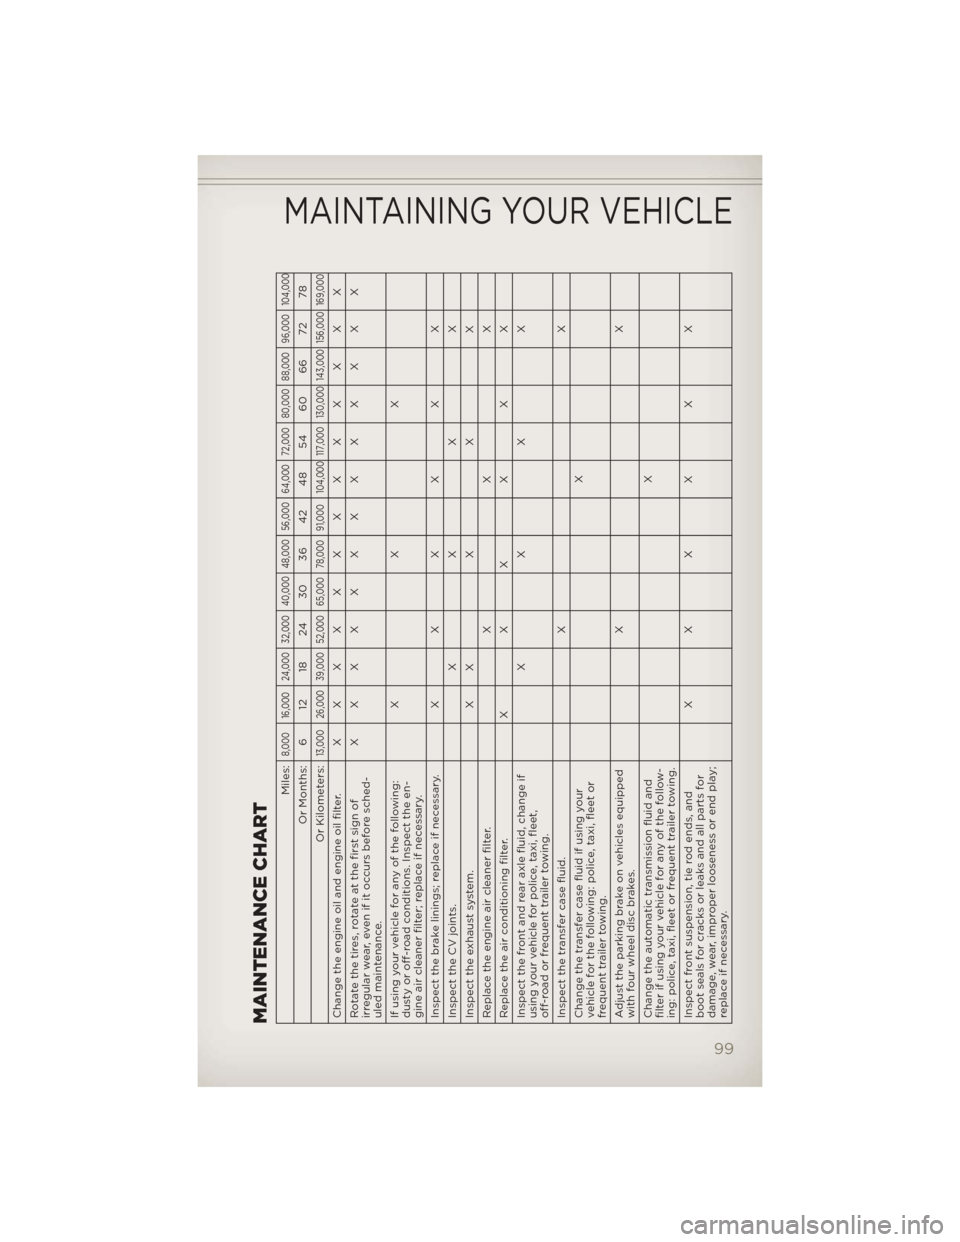 JEEP LIBERTY 2012 KK / 2.G User Guide MAINTENANCE CHART
Miles:
8,000 16,000 24,000 32,000 40,000 48,000 56,000 64,000 72,000 80,000 88,000 96,000 104,000
Or Months: 6 12 18 24 30 36 42 48 54 60 66 72 78
Or Kilometers:
13,000 26,000 39,000